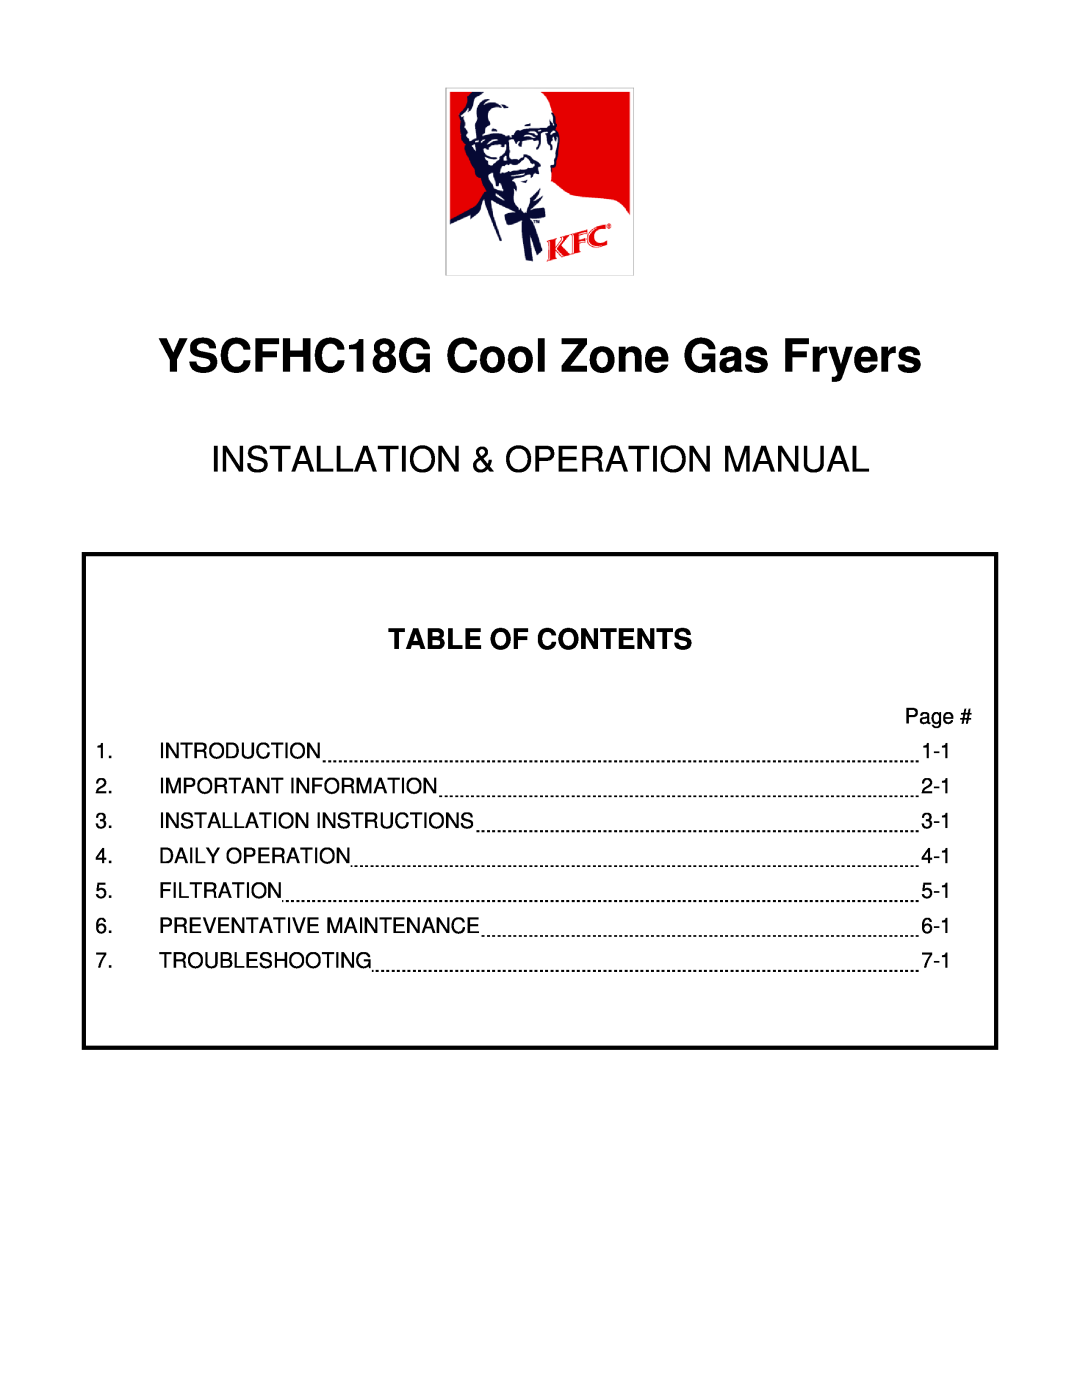 Frymaster *8196329* manual Table Of Contents, YSCFHC18G Cool Zone Gas Fryers 